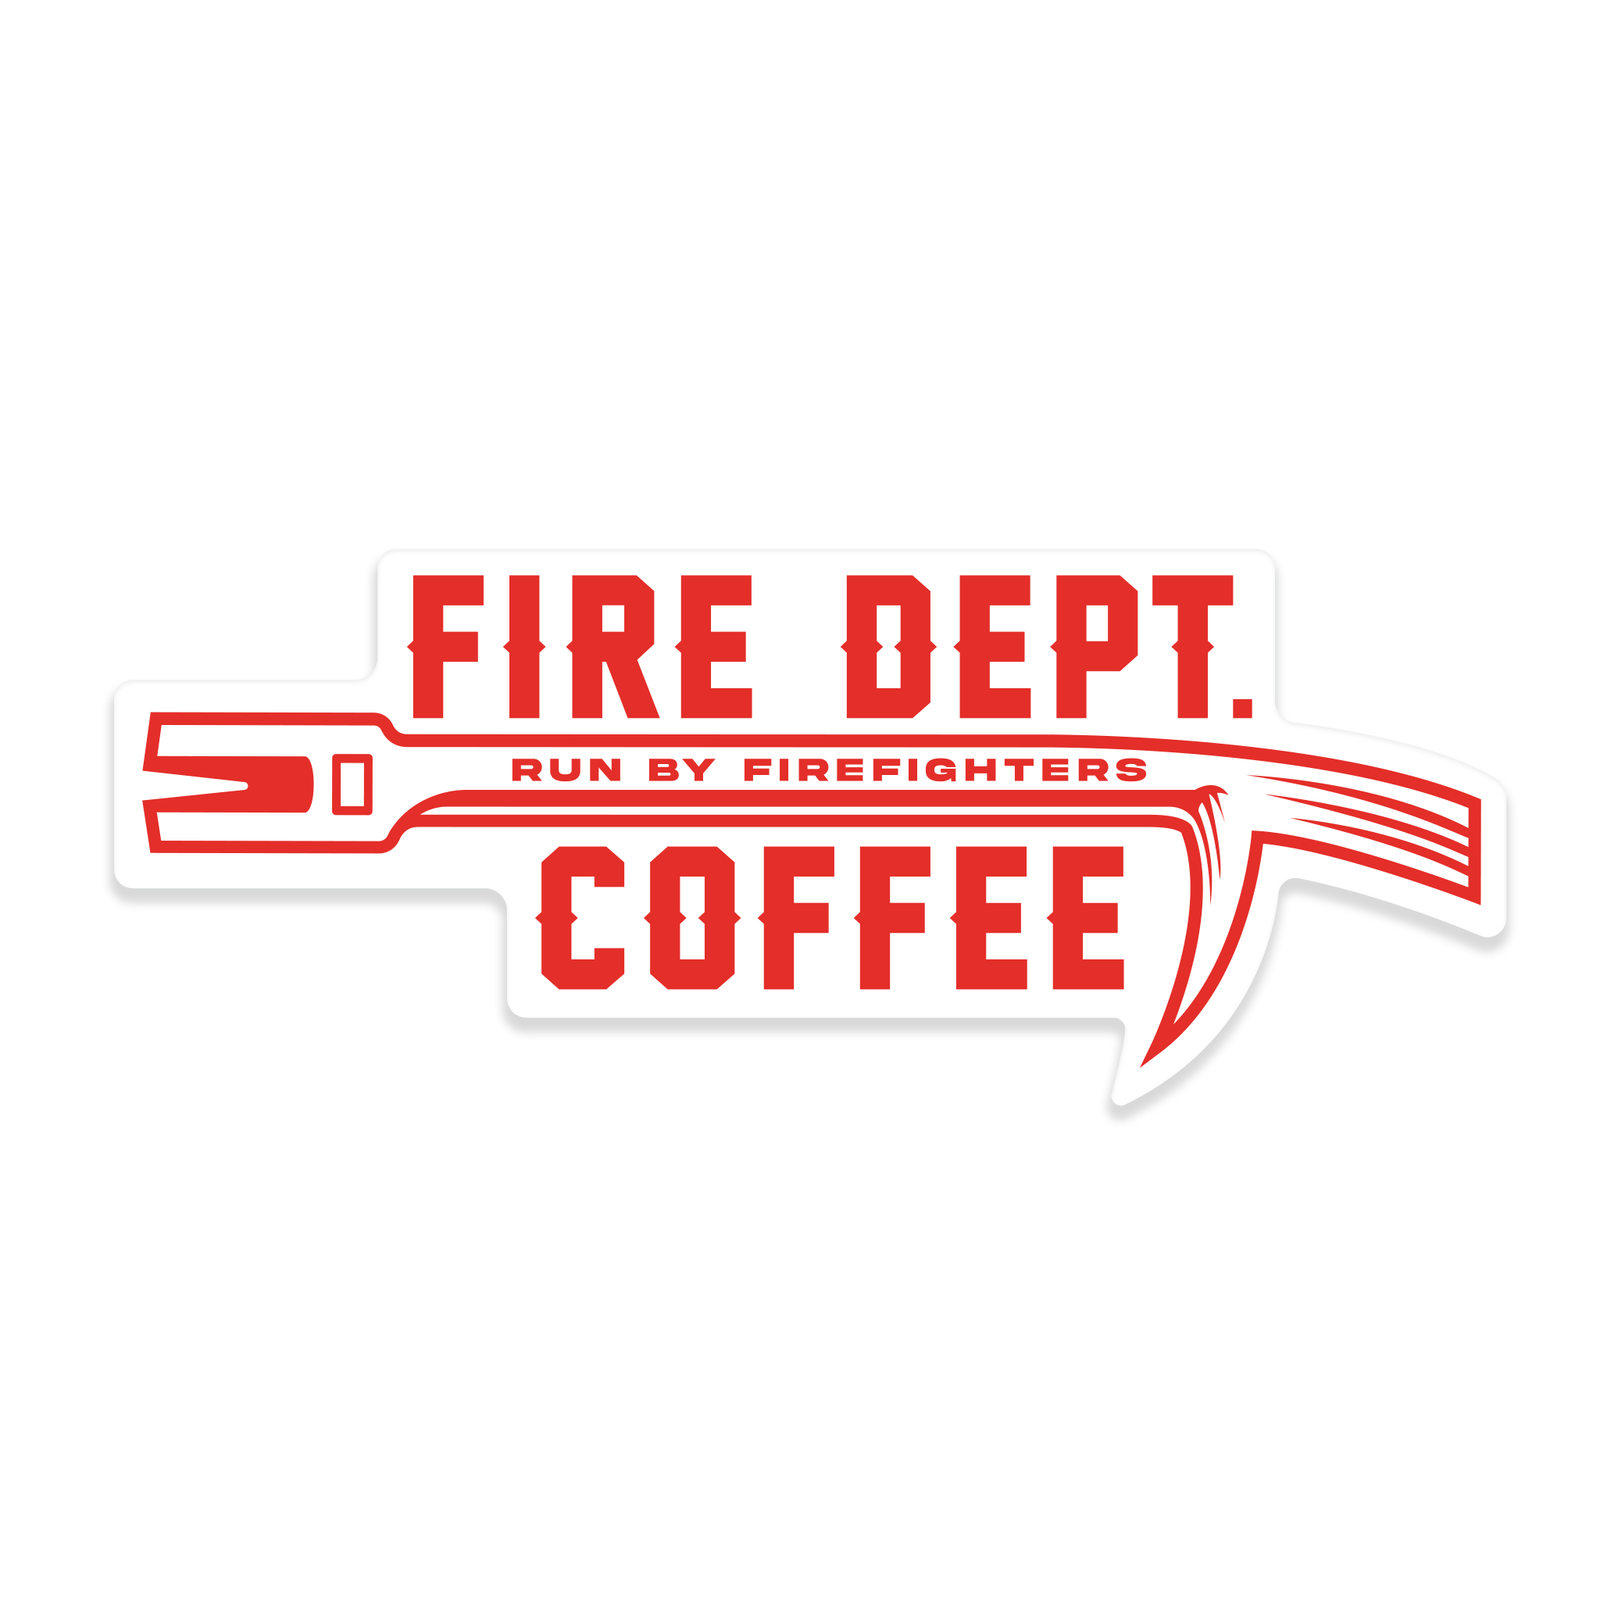 A Fire Dept. Coffee sticker featuring a red Halligan Bar with the text "Run By Firefighters".